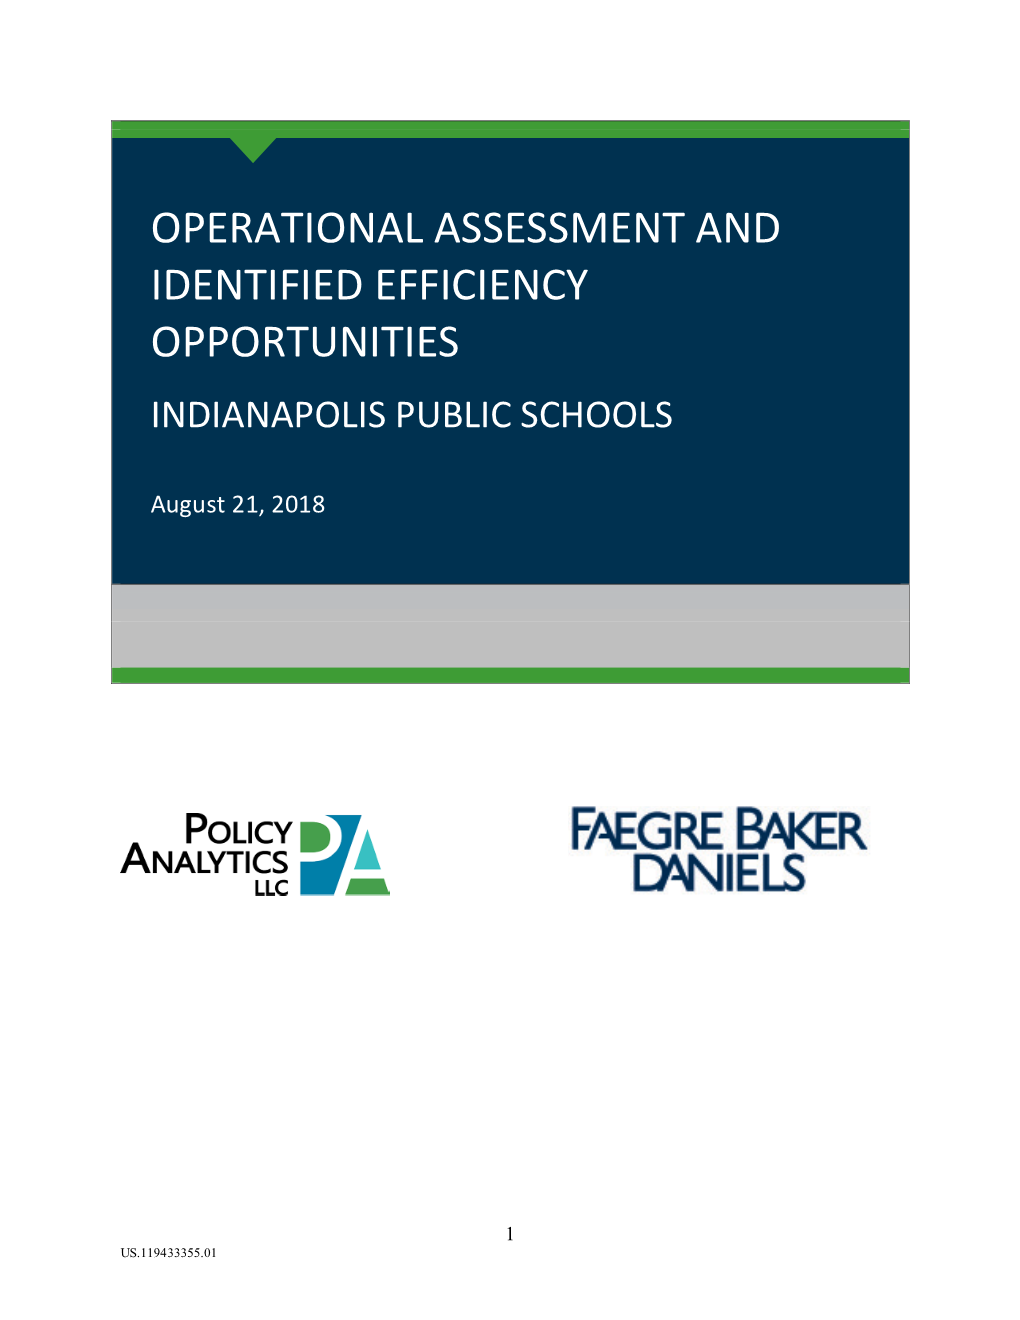 Operational Assessment and Identified Efficiency Opportunities Indianapolis Public Schools